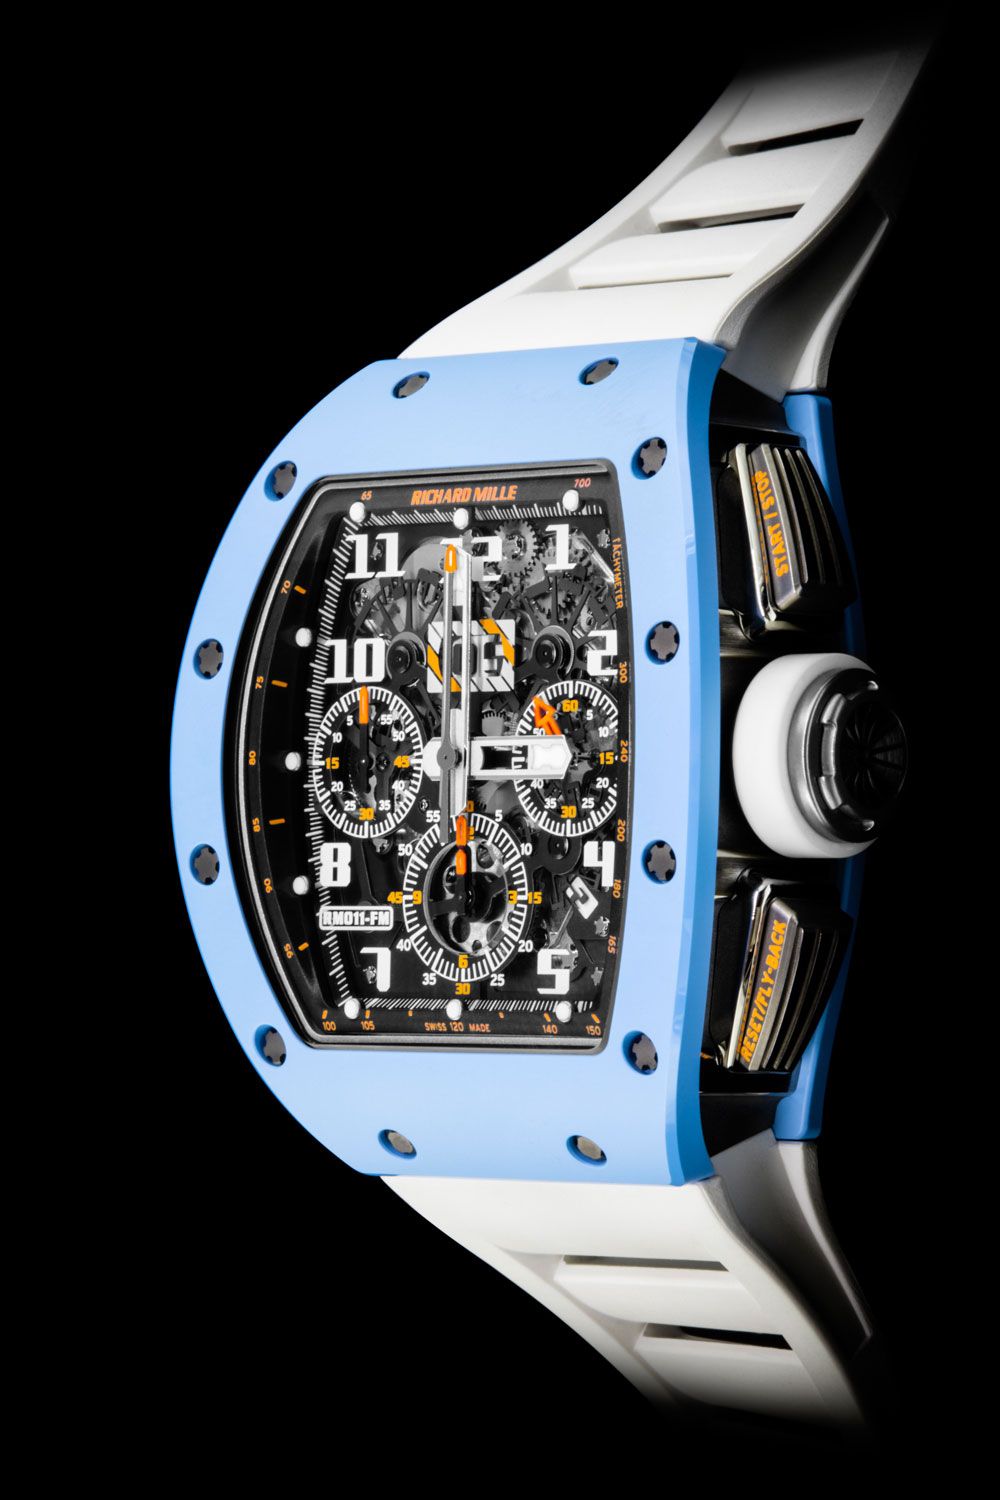 Richard Mille Manual Winding Tourbillon Alain Prost Carbon TPT Limited edition of 30 pieces - RM70-01